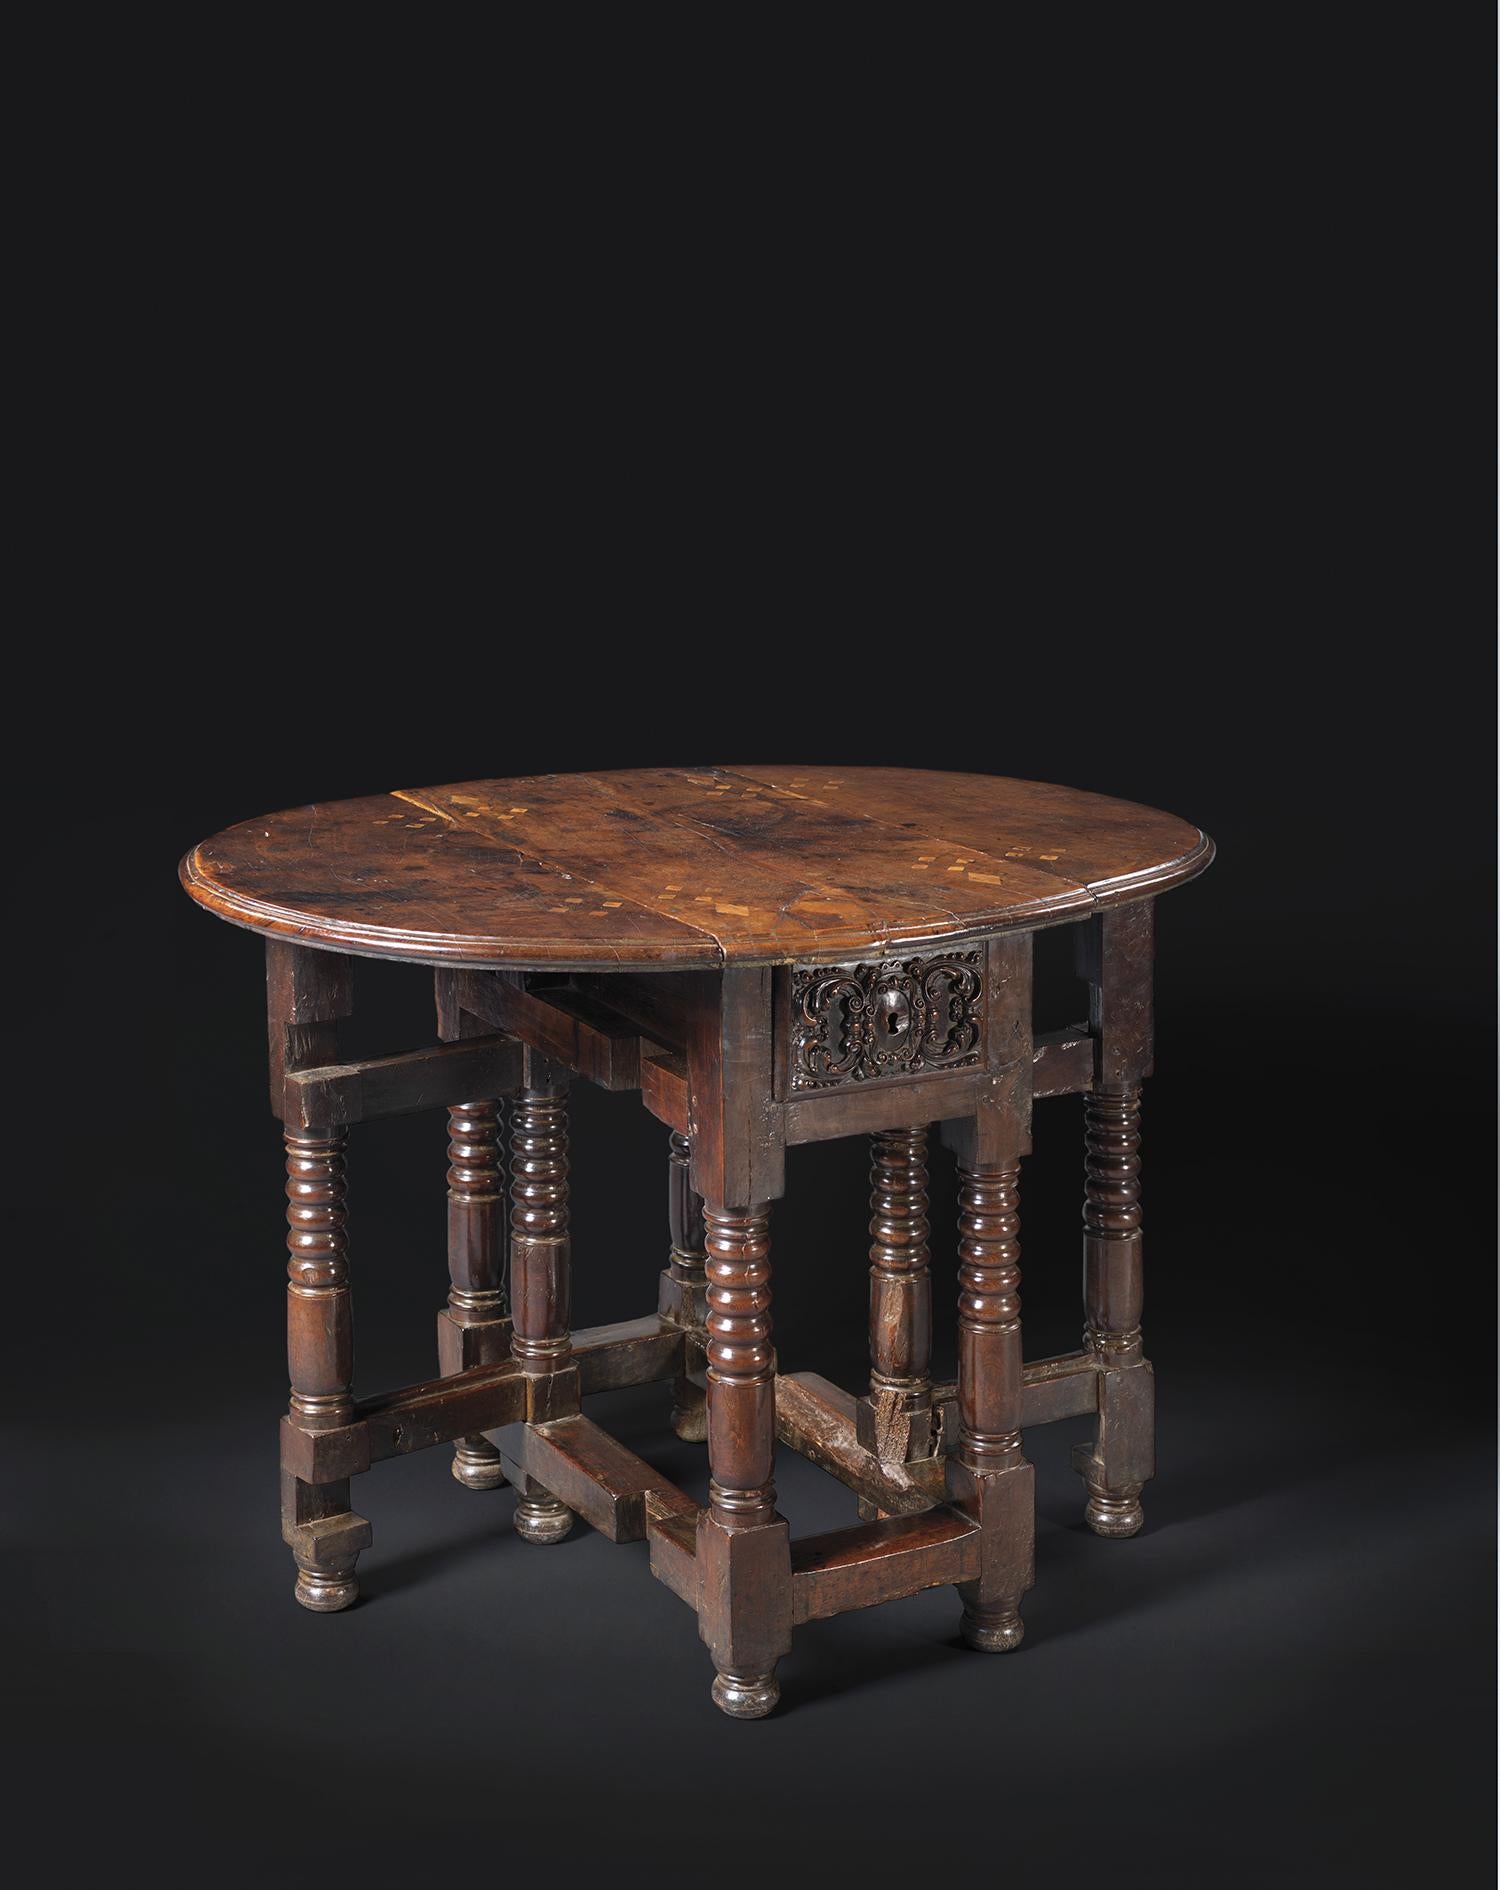 Measures: height : 80 cm
Length : 83 cm
Full length : 108 cm
Depth : 40 cm

Walnut inlaid with ligh coloured wood 

This original and clever walnut table stands on rotating feet. Four turned-wood legs, linked by a circular spacer, support the